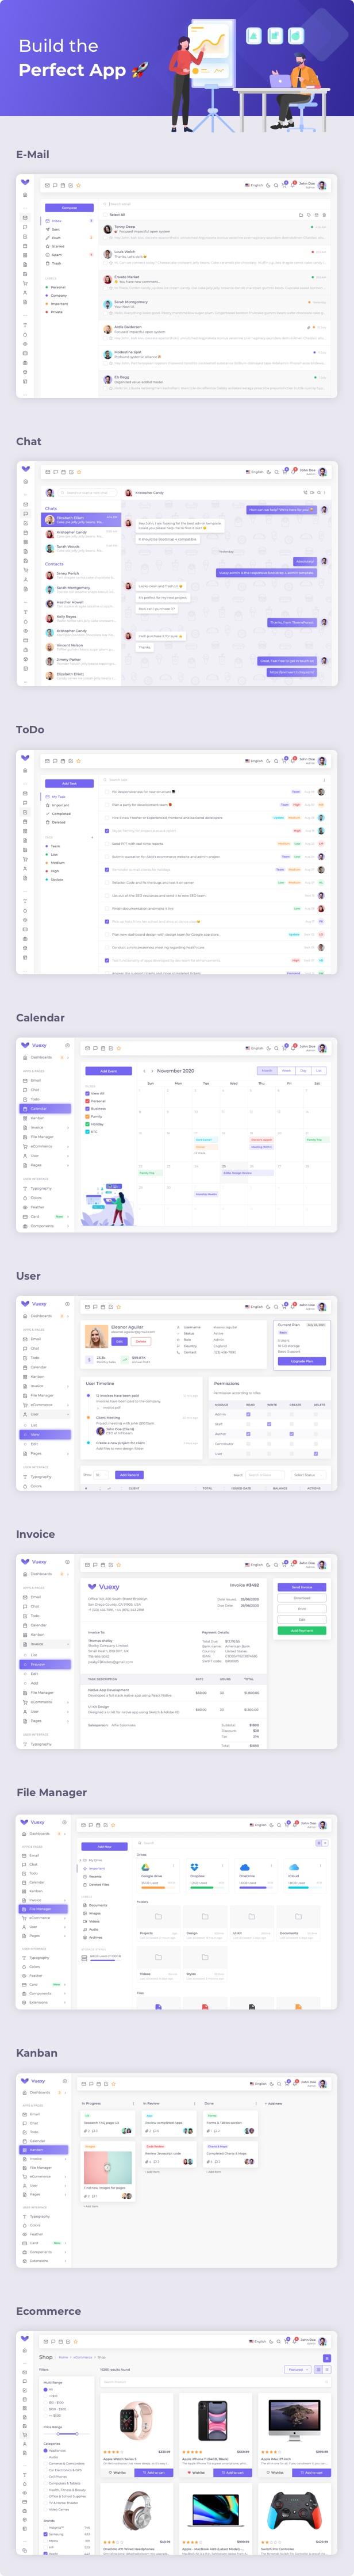 10 applications - Vuexy – Figma Admin Dashboard UI Kit Template with Atomic Design System